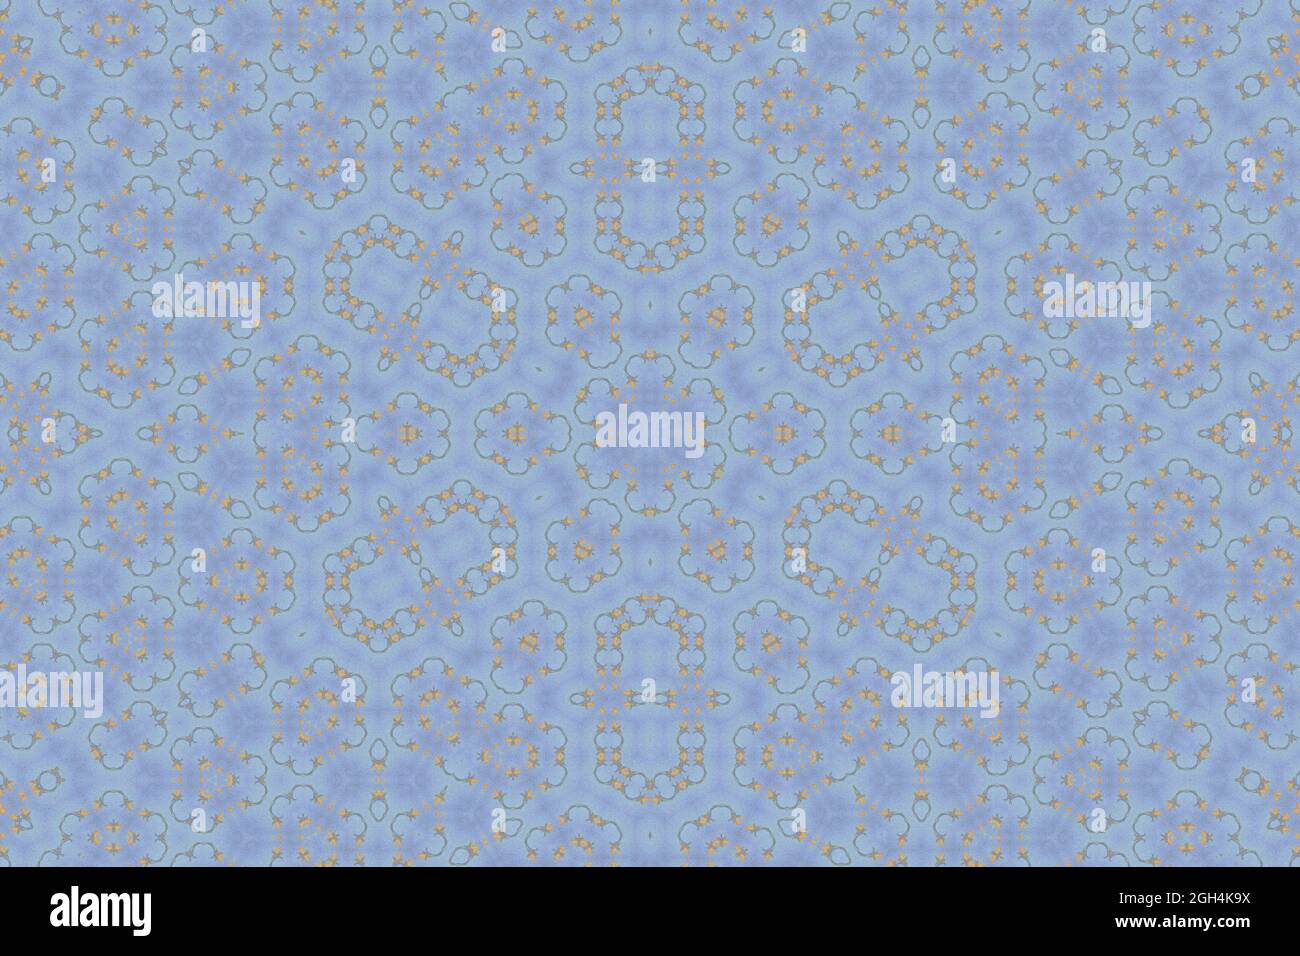 Yoga energy print. Abstract energy wall art. Blue sky and stars abstract. Blue kaleidoscope patterns. DNA abstract background and backdrops. Stock Photo